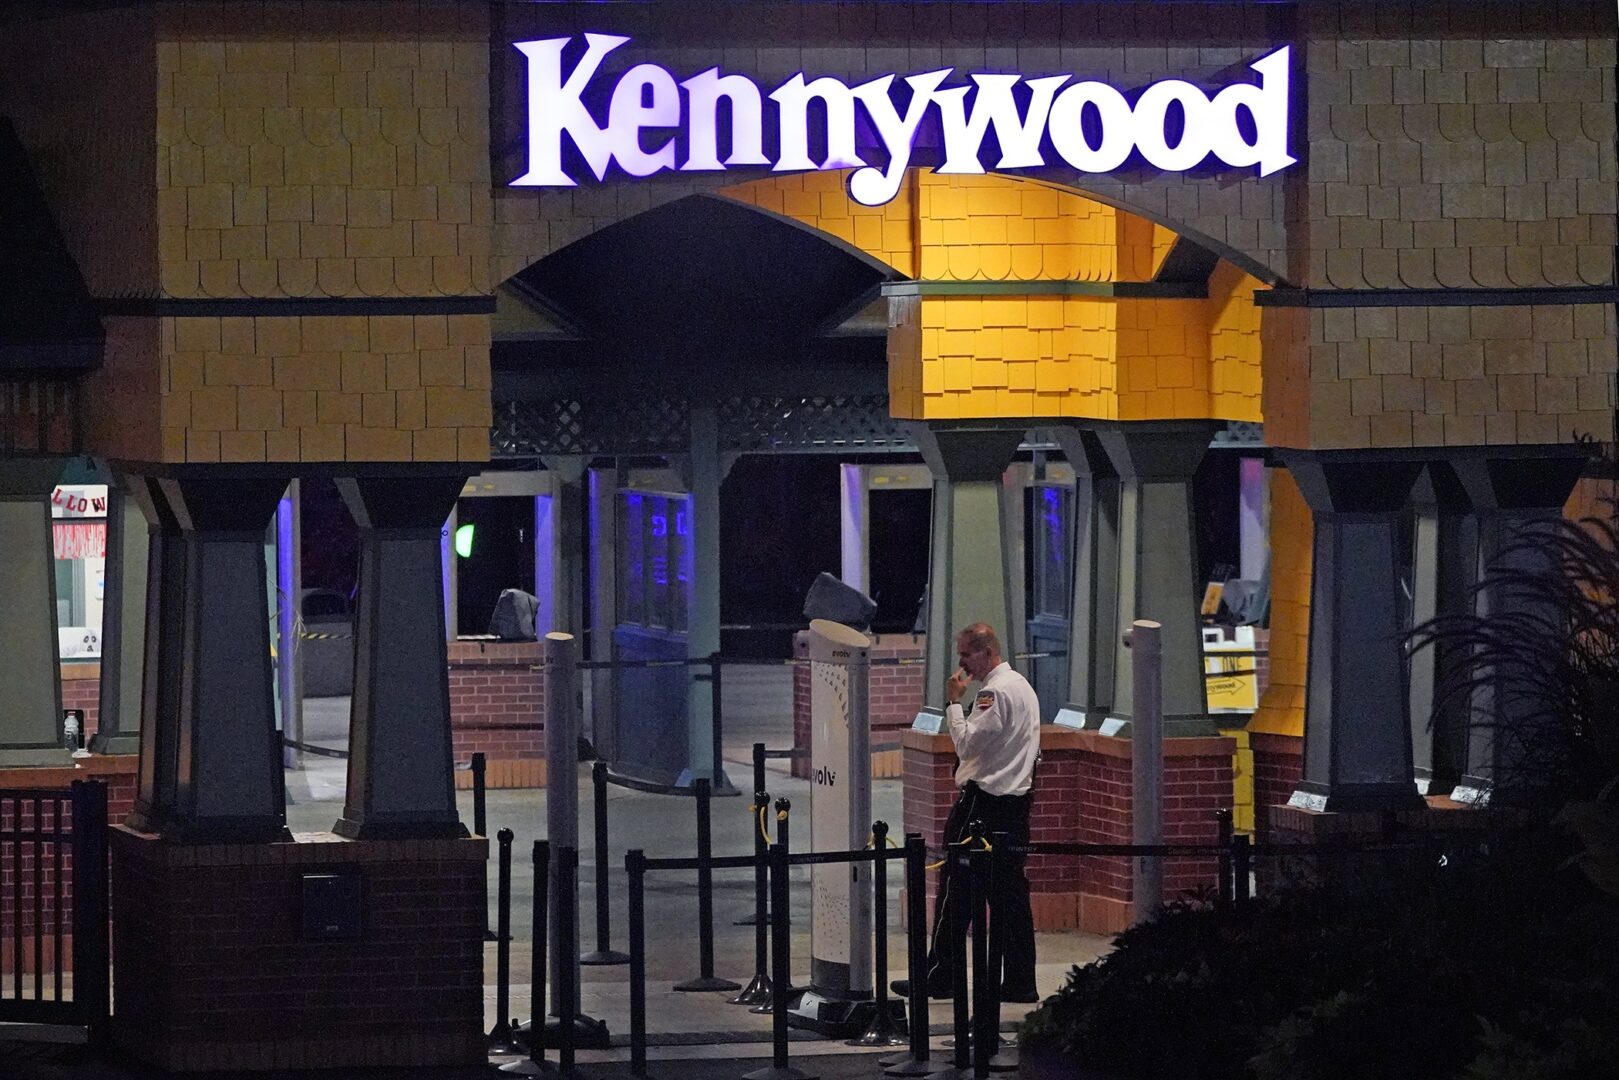 A Kennywood Park security guard stands at the main entrance to the amusement park in West Mifflin, Pa., early Sunday, Sept 25, 2022.  